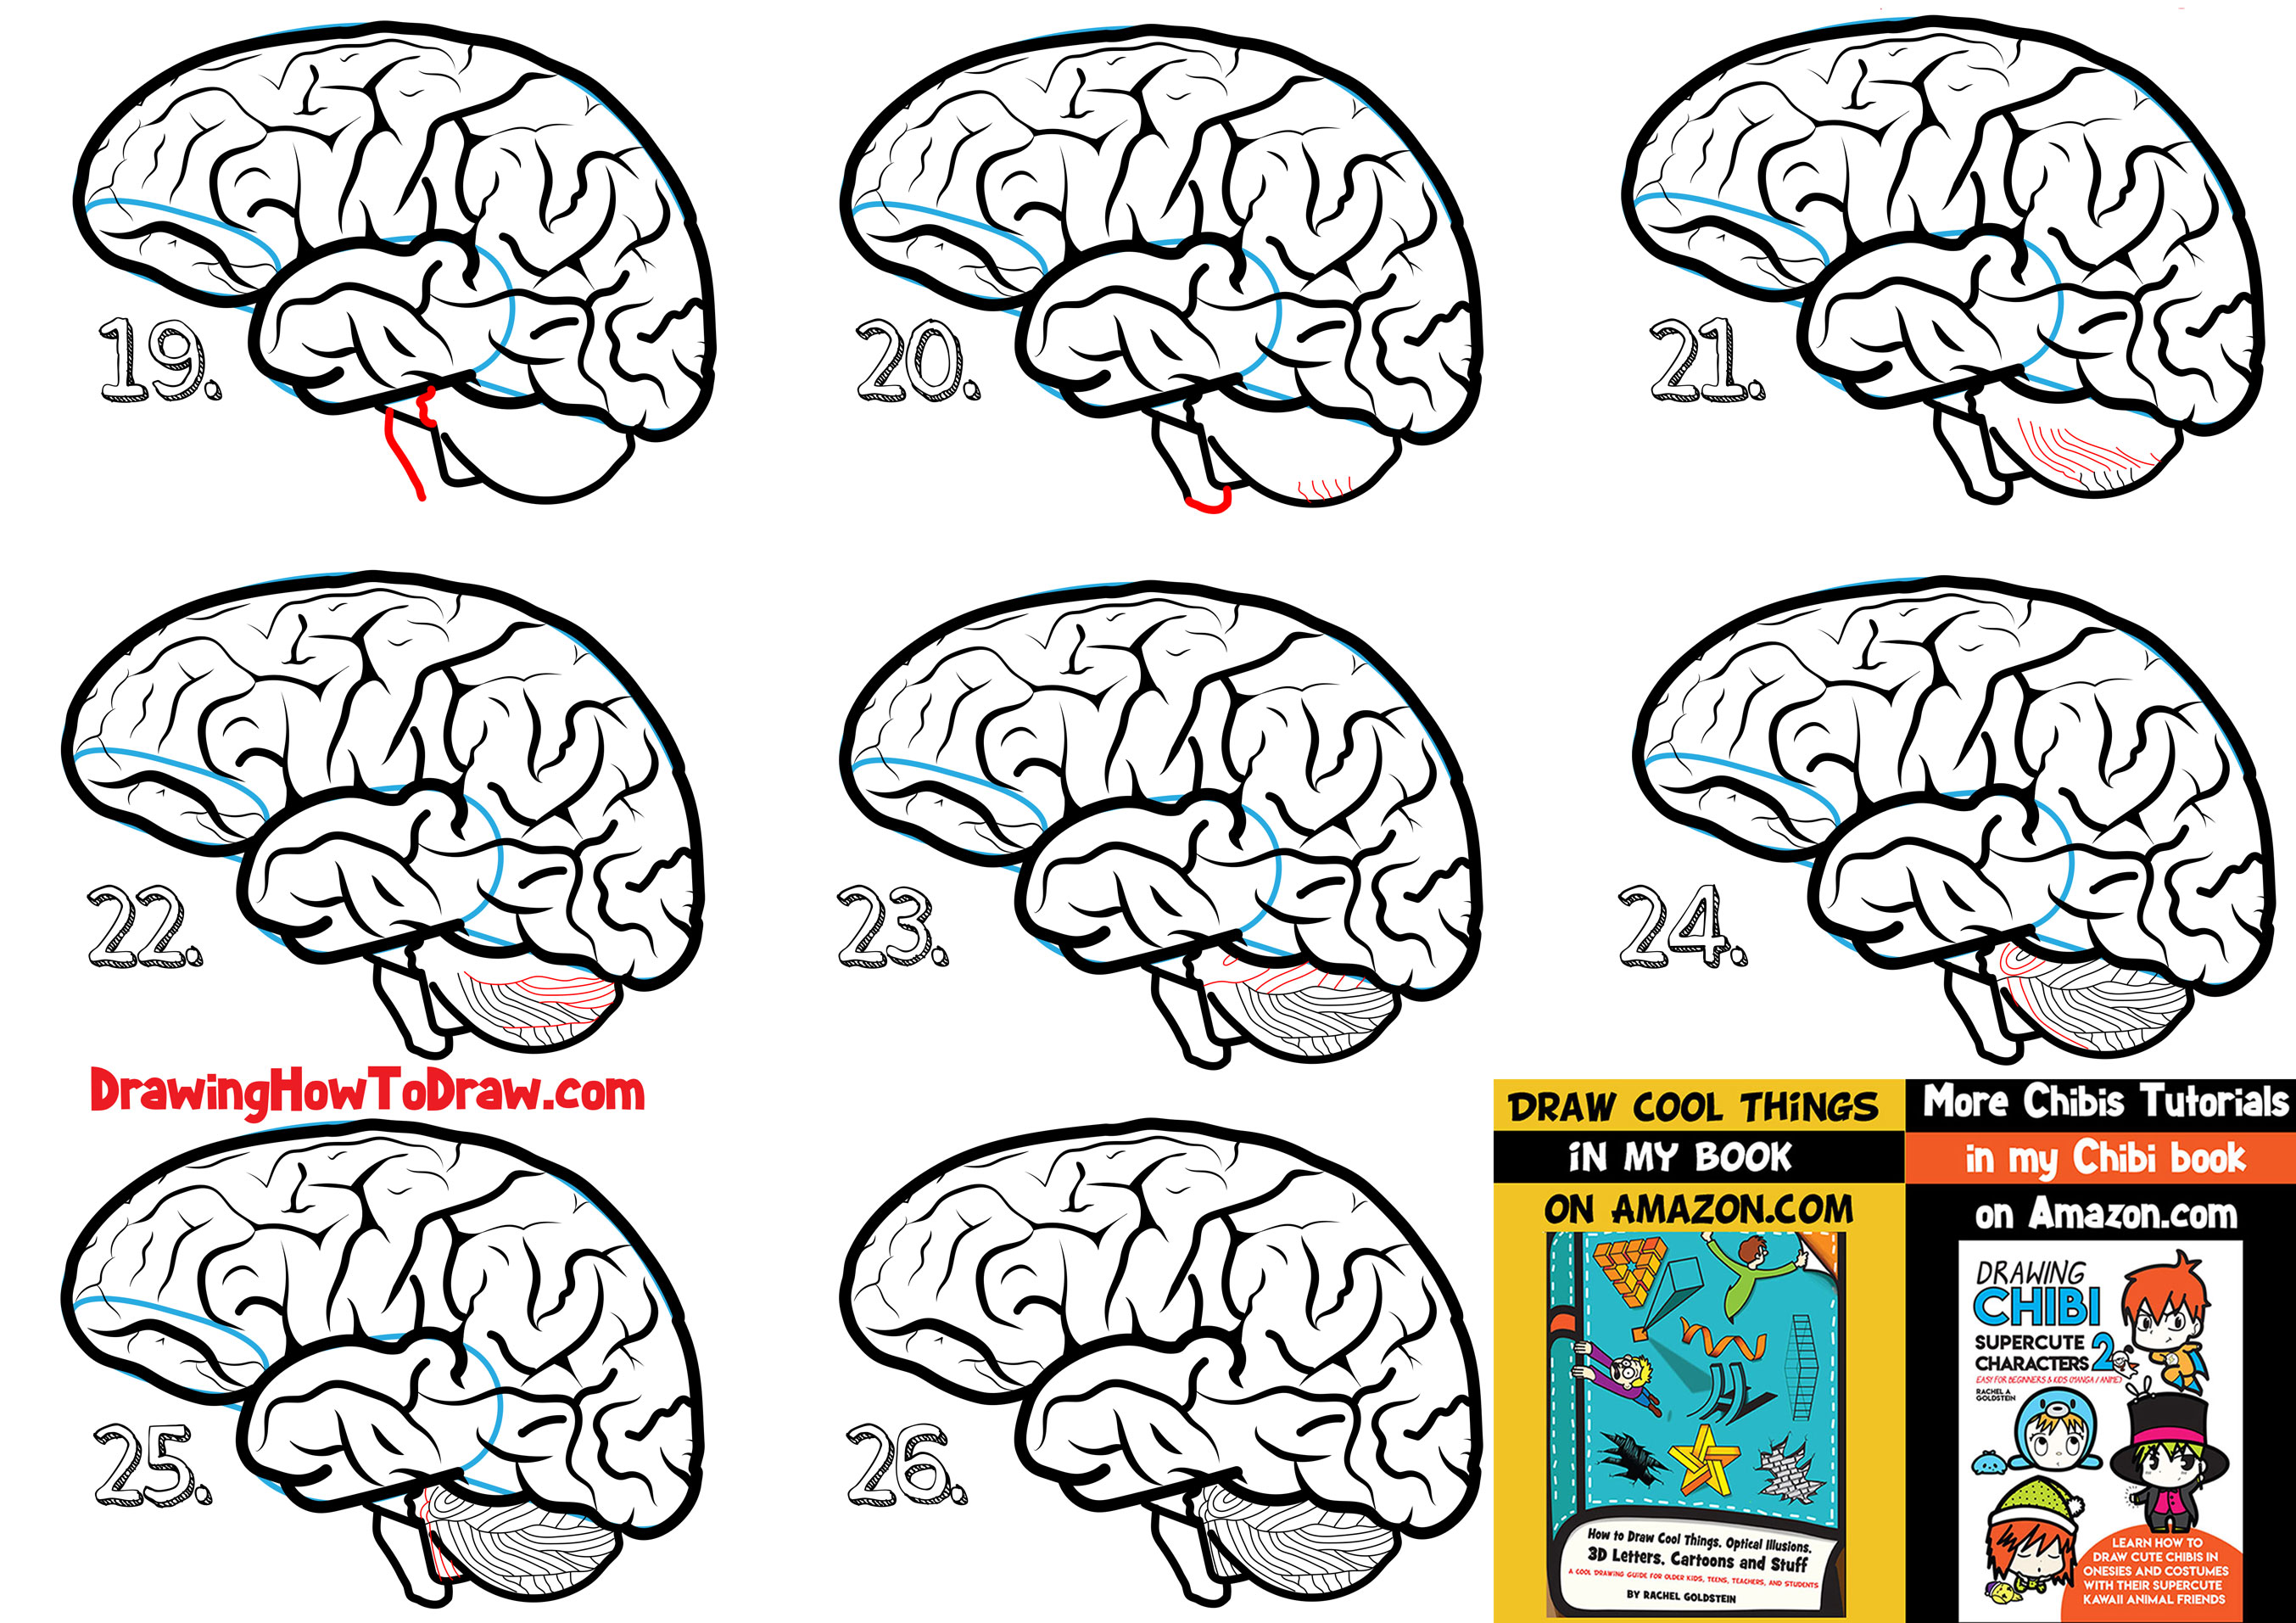 How to Draw a Human Brain Easy Steps Drawing Lesson for Beginners